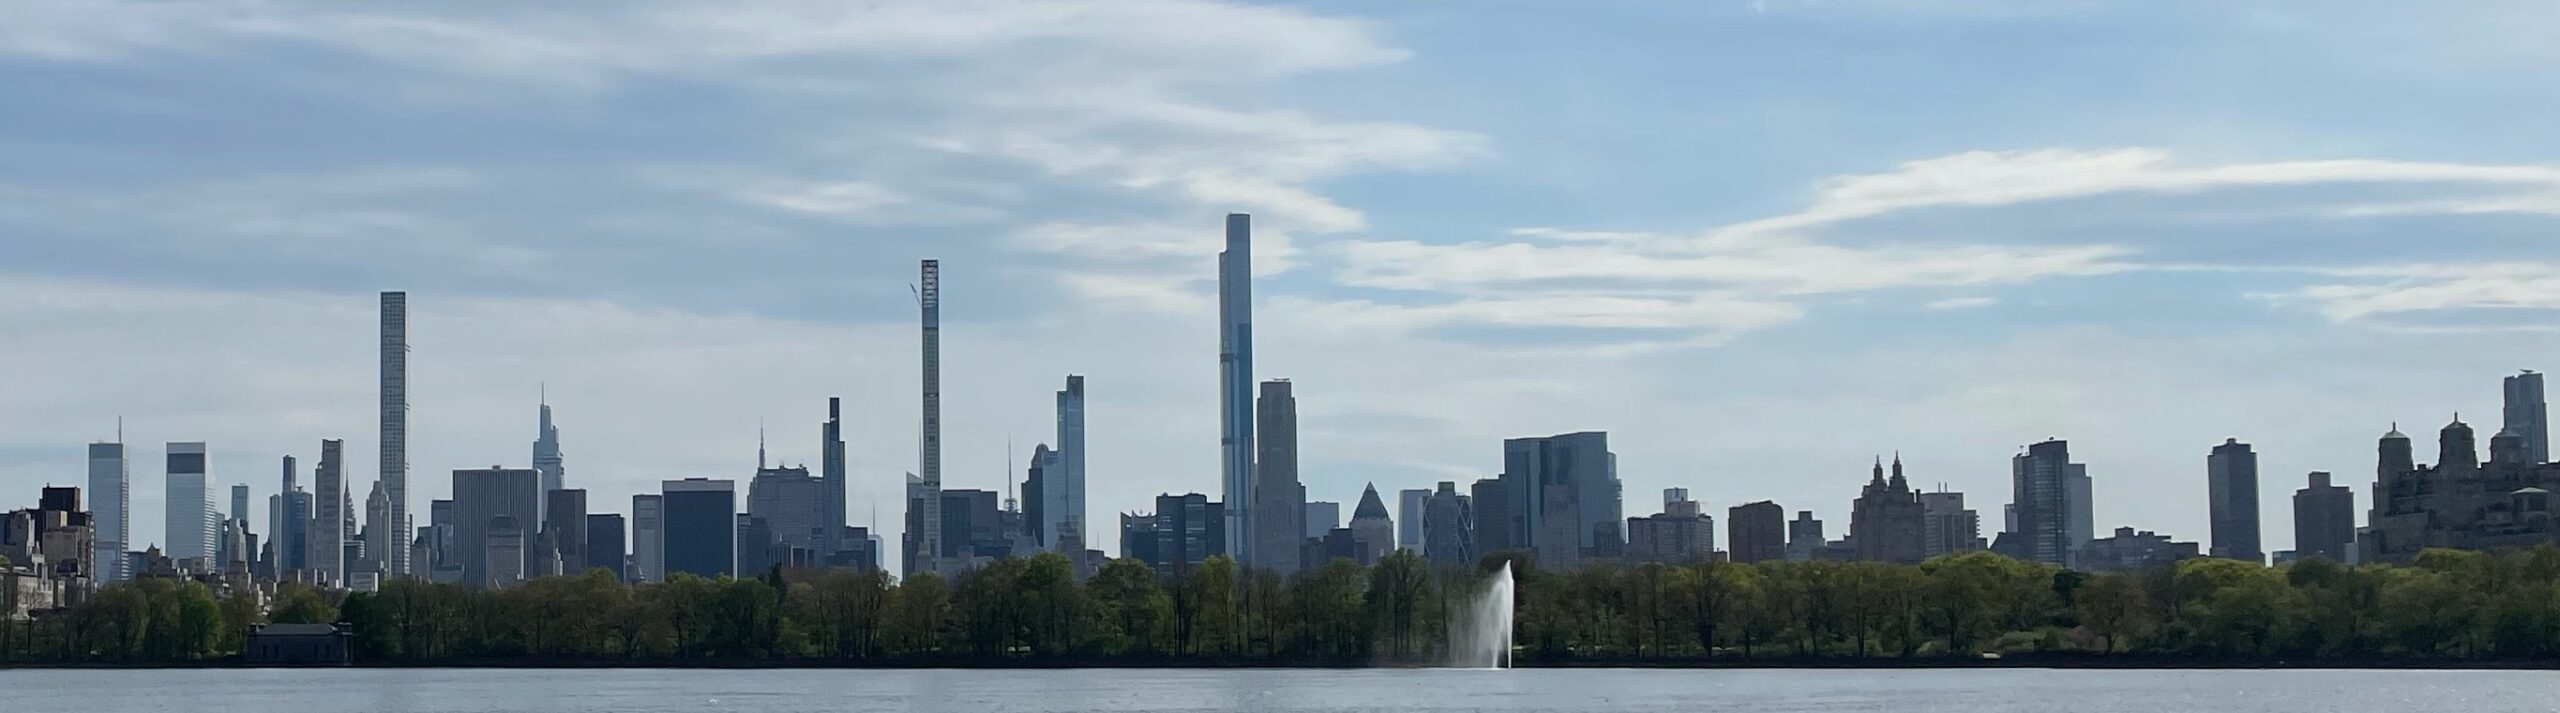 Photo of the Manhattan skyline as seen from the reservoir in Central Park.